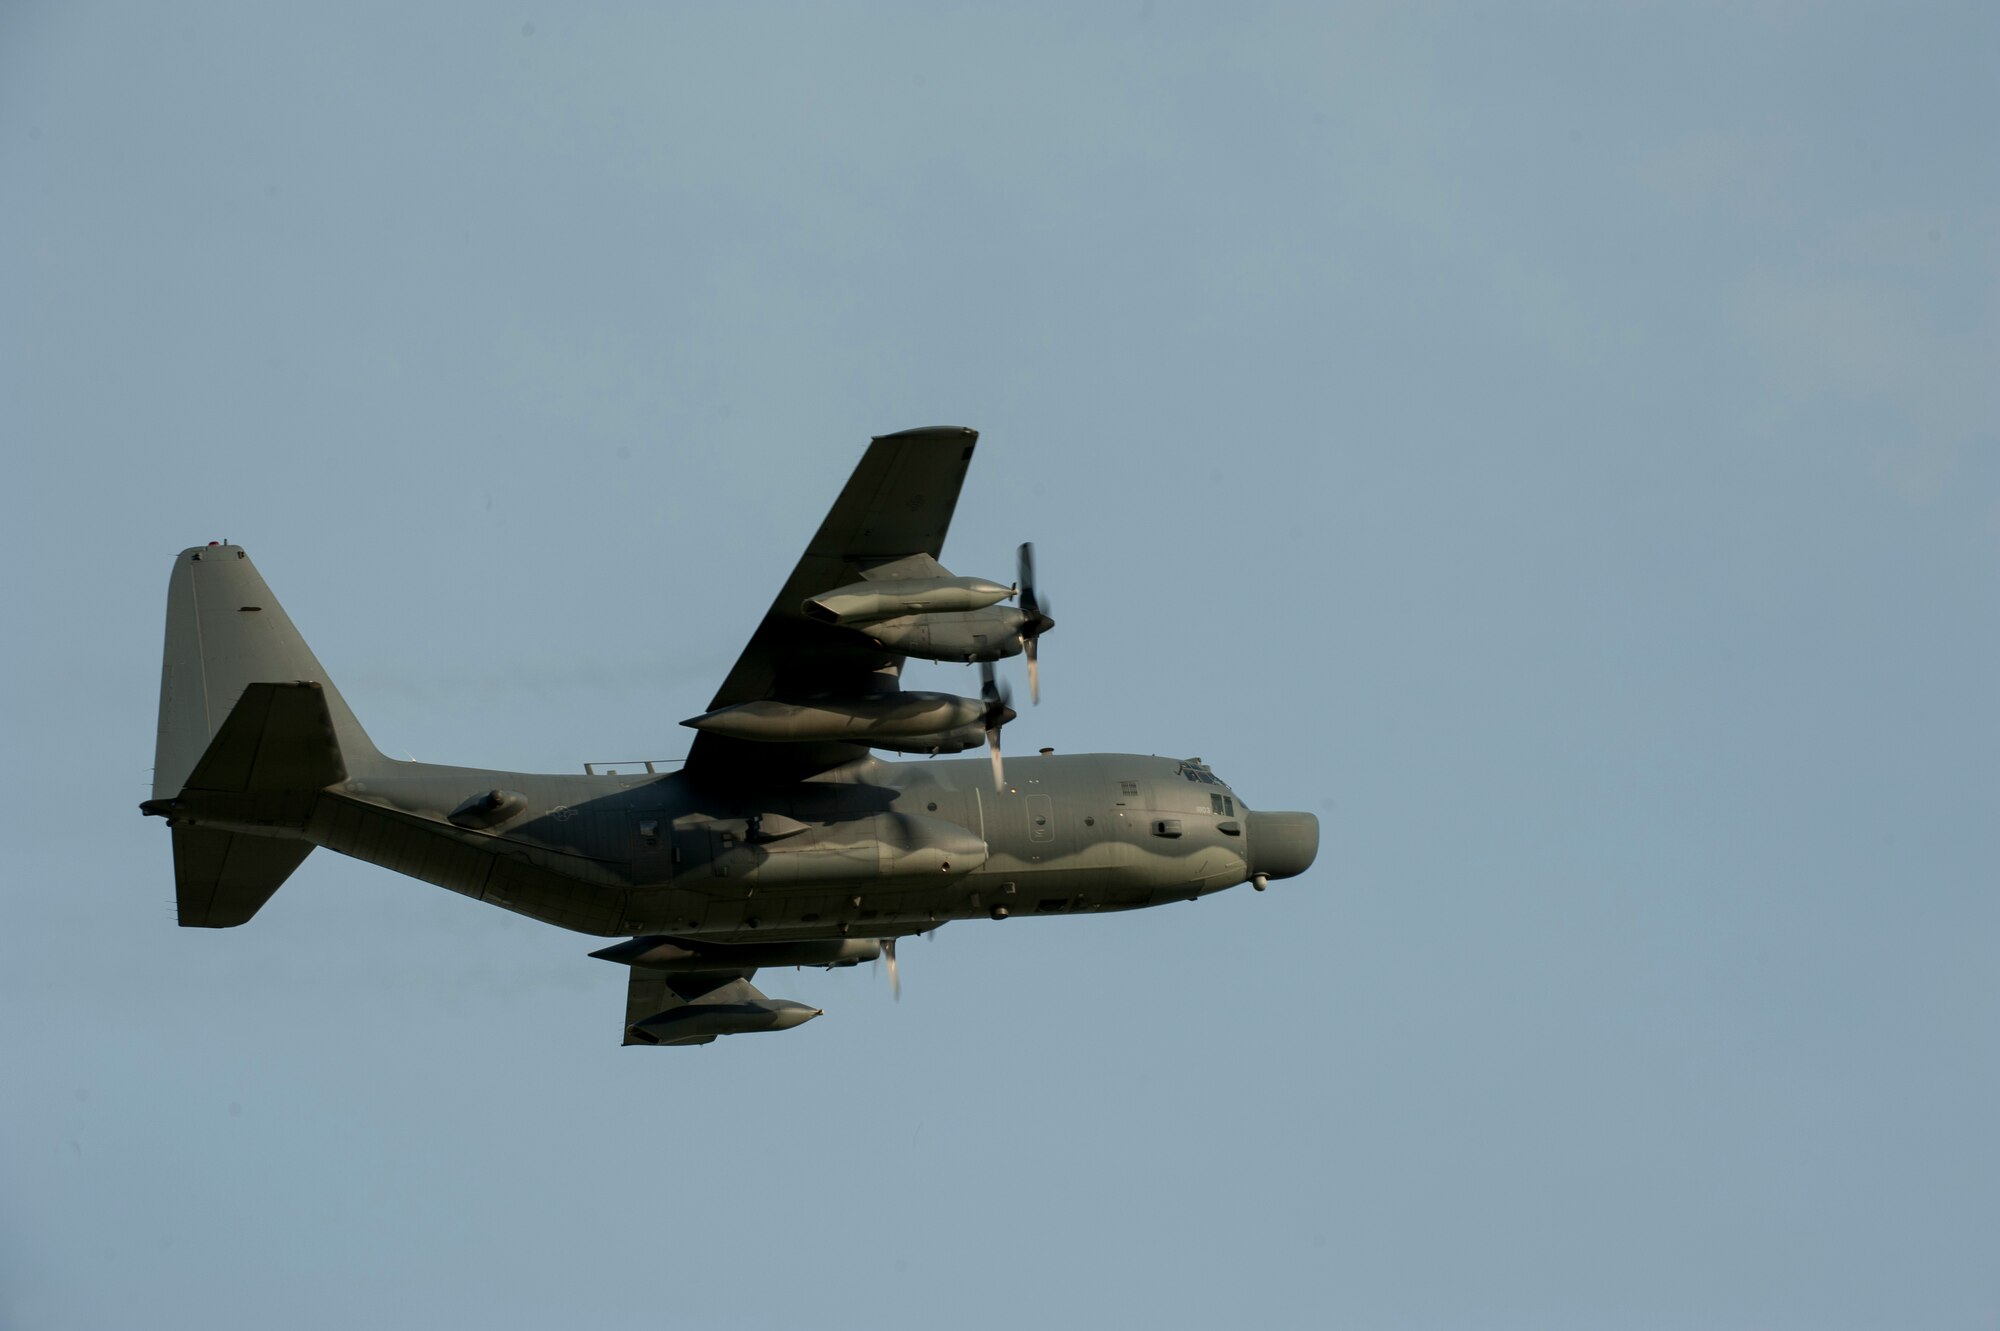 A U.S. Air Force MC-130H Combat Talon II from the 1st Special Operations Squadron flies over Kadena Air Base, Japan, shortly after takeoff May 14, 2015. The 1st Special Operations Squadron is one of five squadrons that make up the 353rd Special Operations Group.  As the only Air Force special operations group in the Pacific, they are the focal point for Air Force special operations activities throughout the United States Pacific Command Theater.  (U.S. Air Force photo by Senior Airman Stephen G. Eigel)